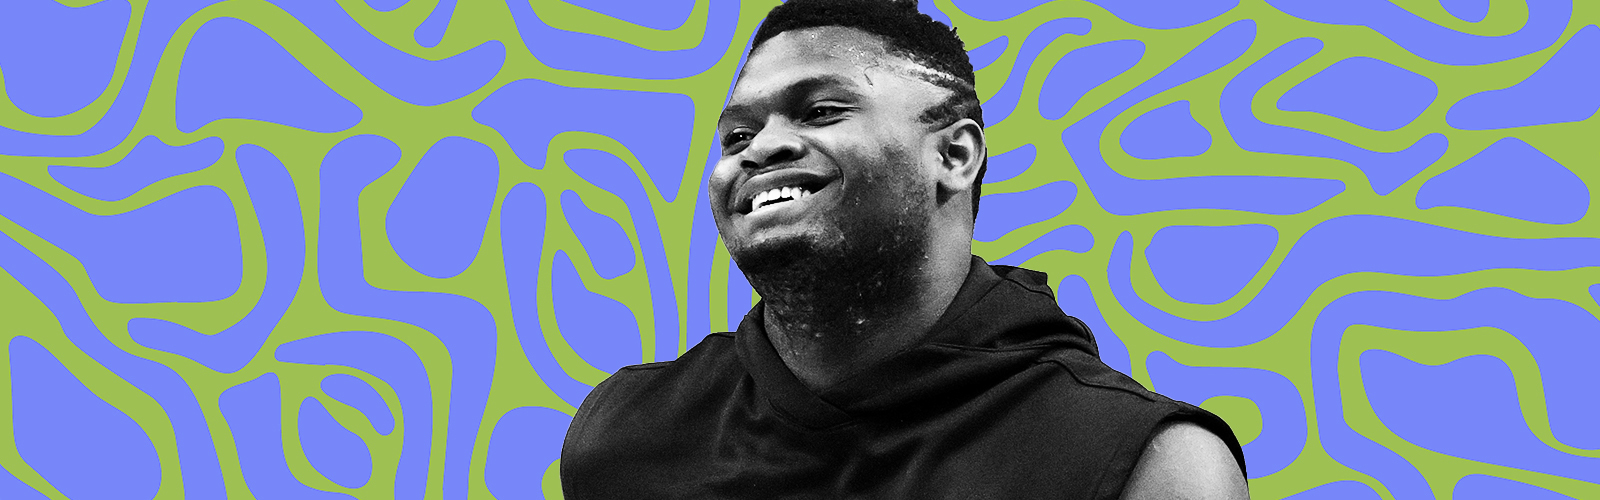 Zion Williamson Gives Back So He Can Never Forget Where He Came From